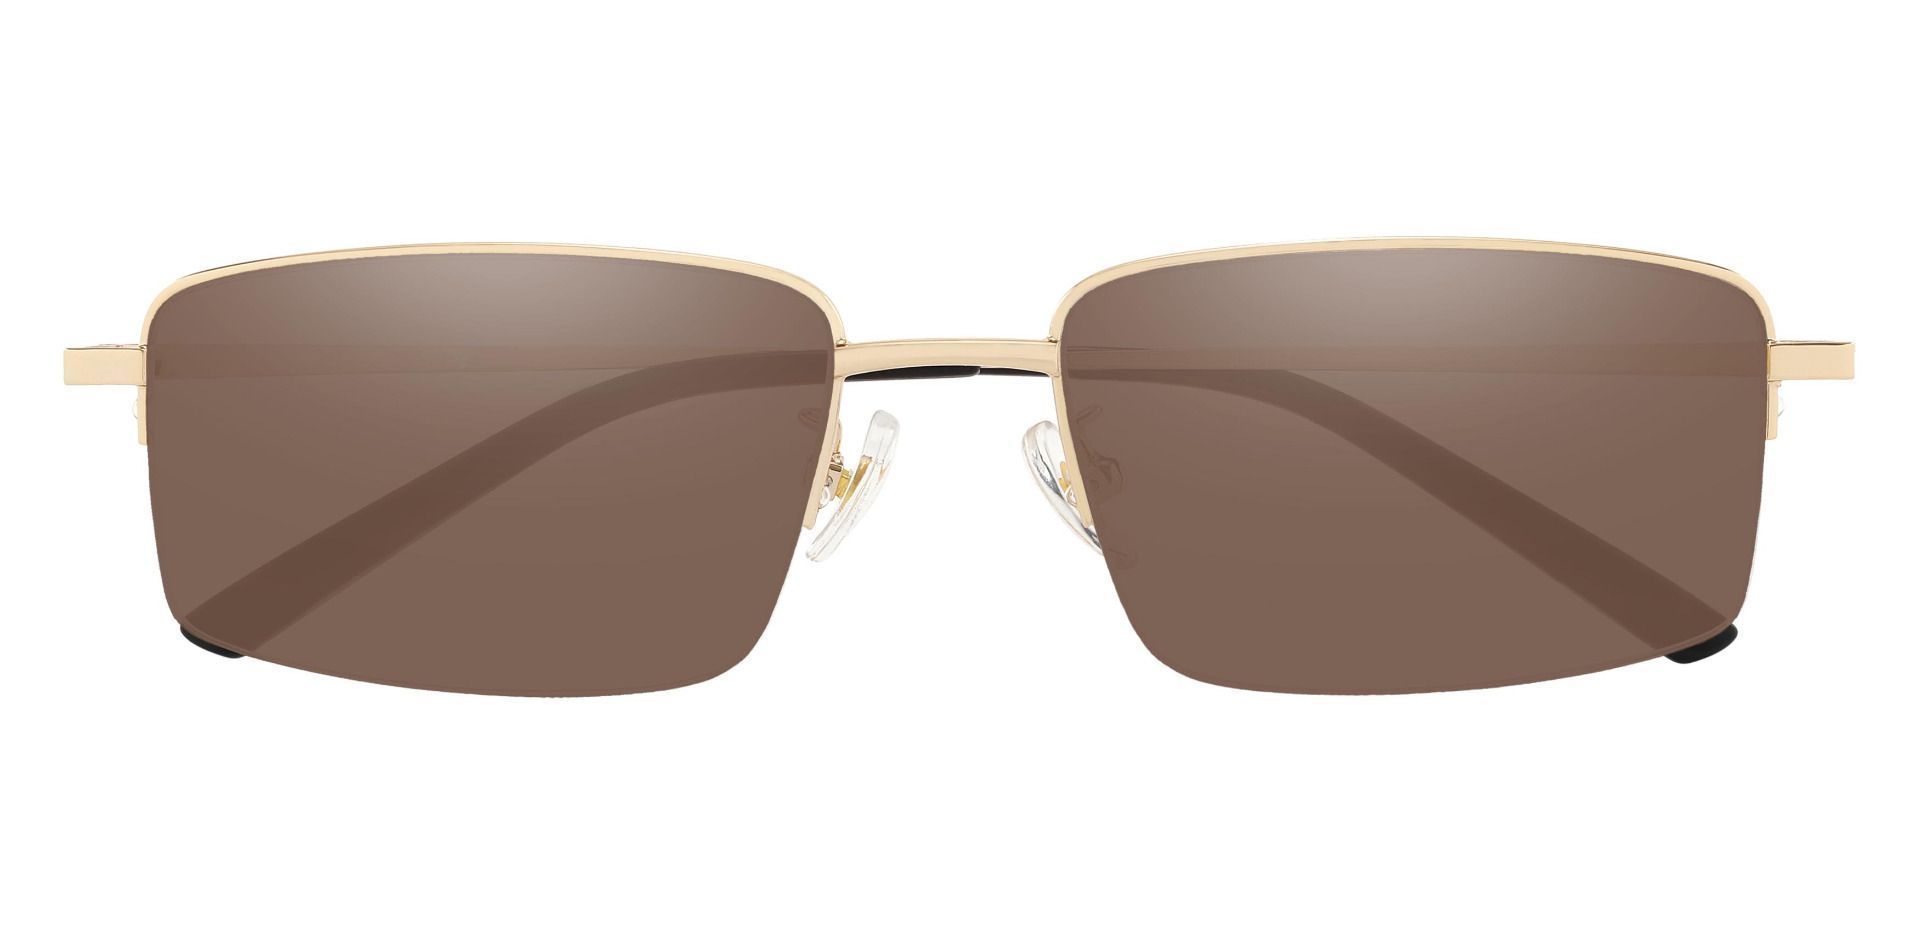 Wayne Rectangle Non-Rx Sunglasses - Gold Frame With Brown Lenses